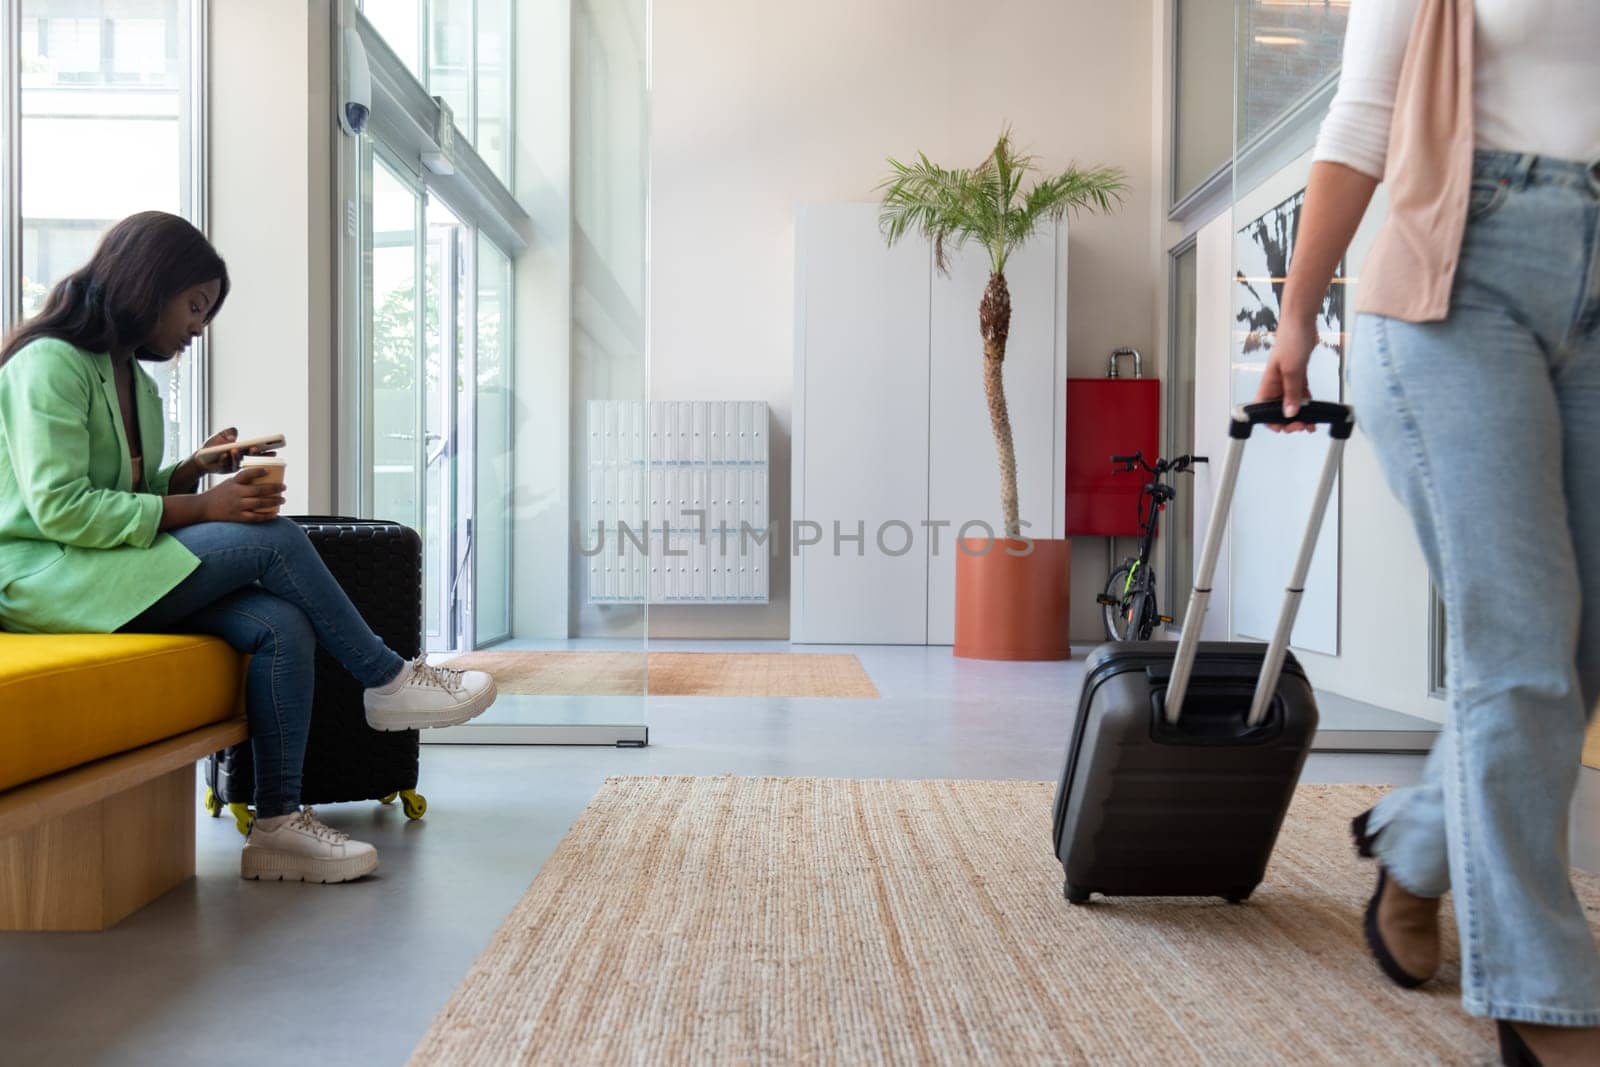 Hotel reception lobby. Female sitting on bench using mobile phone, woman walking by with trolley suitcase. Copy space. by Hoverstock